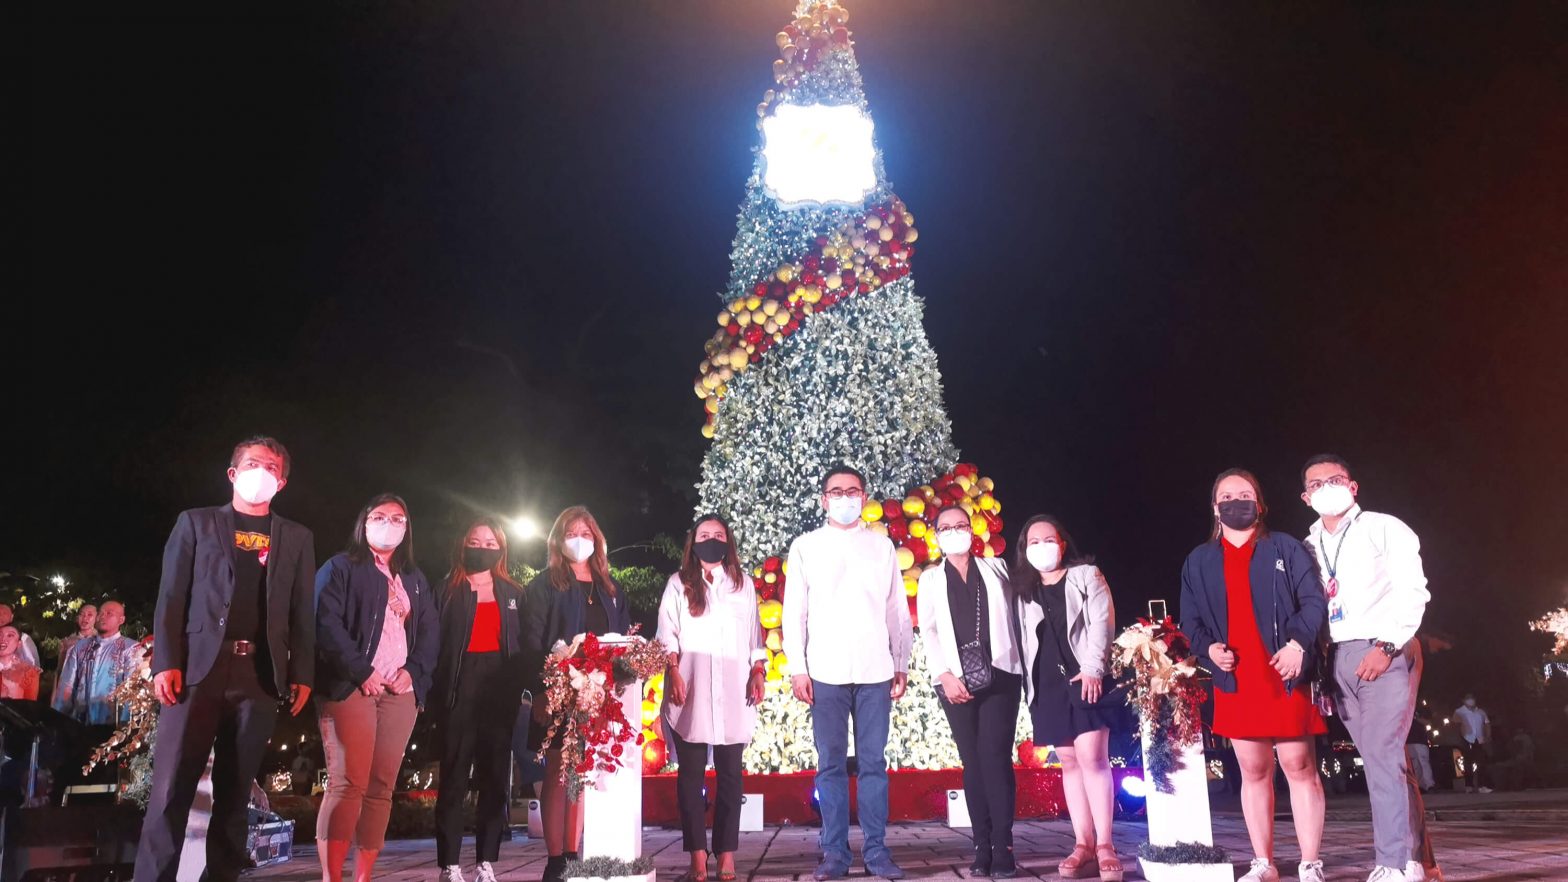 Robinsons Malls spreads Christmas cheer, gifts Cebu City with 35-foot tree in Plaza Independencia